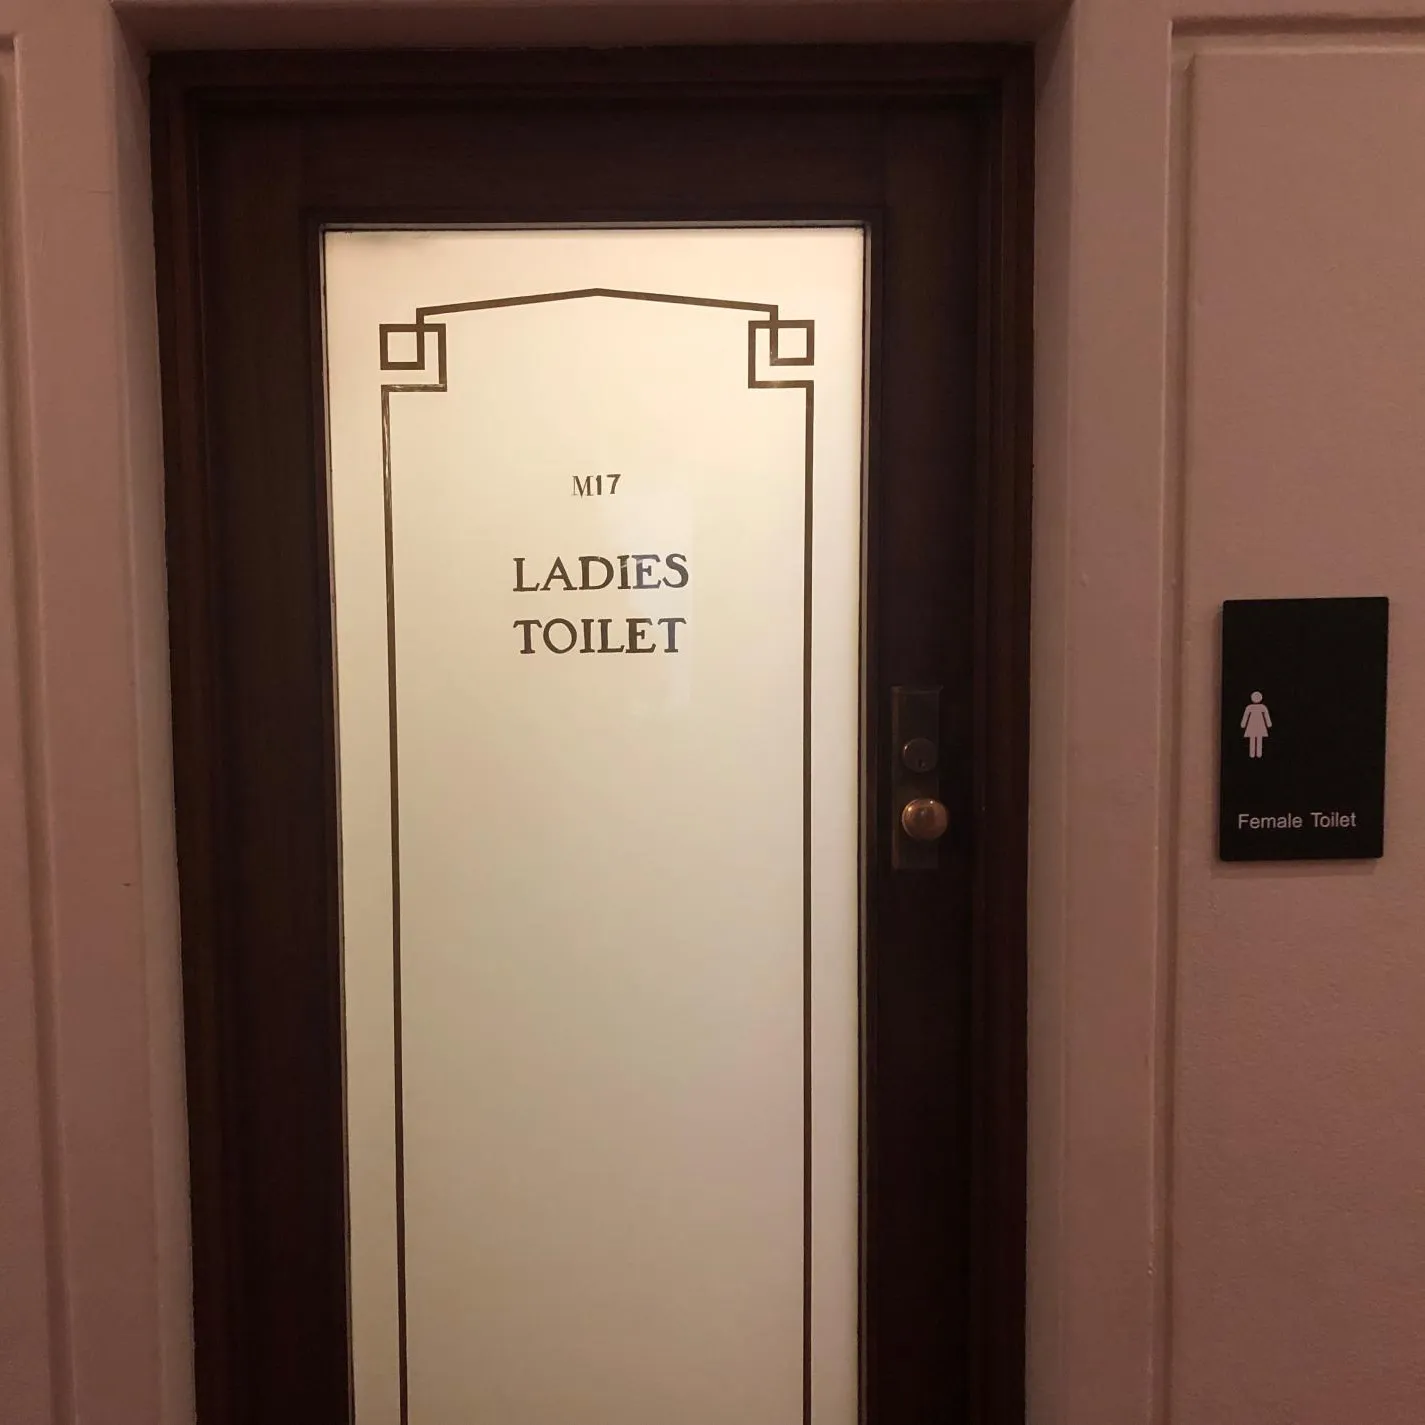 A wooden door with an ornate frosted glass panel with the words M17 Ladies Toilet.